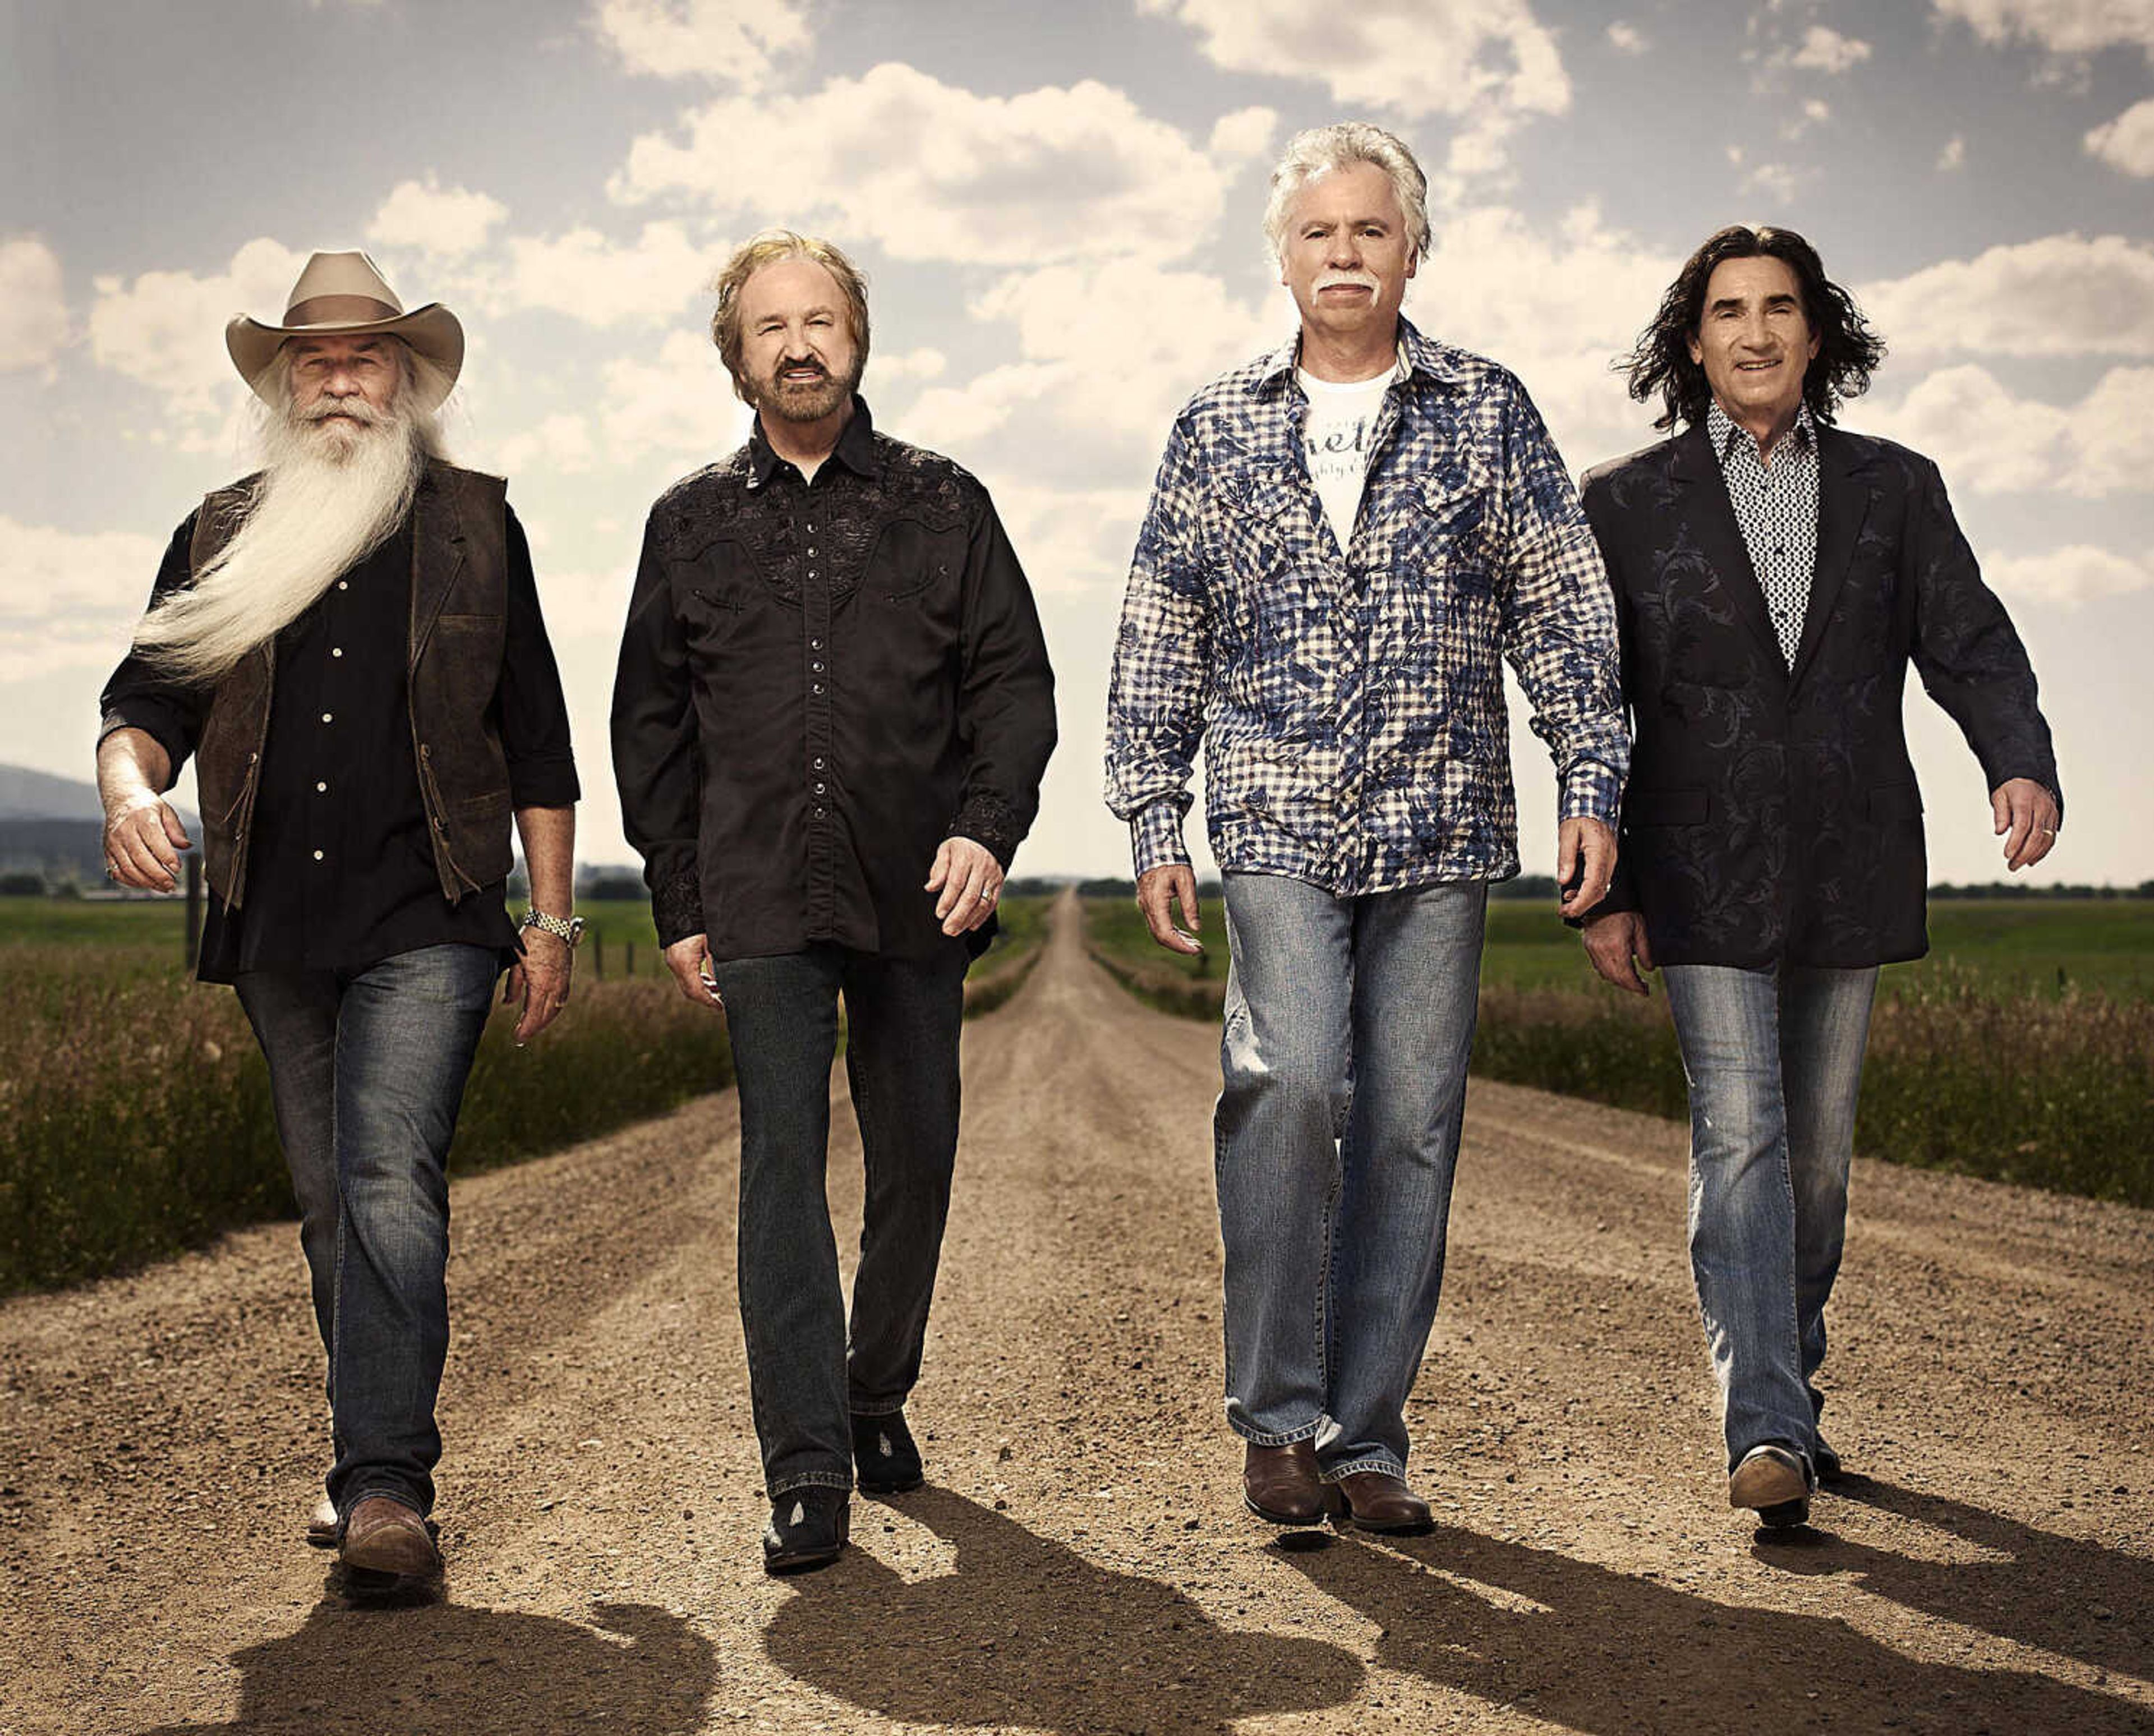 The Oak Ridge Boys will perform at 8 p.m. on Oct. 12 at the Donald C. Bedell Performance Hall. Submitted photo